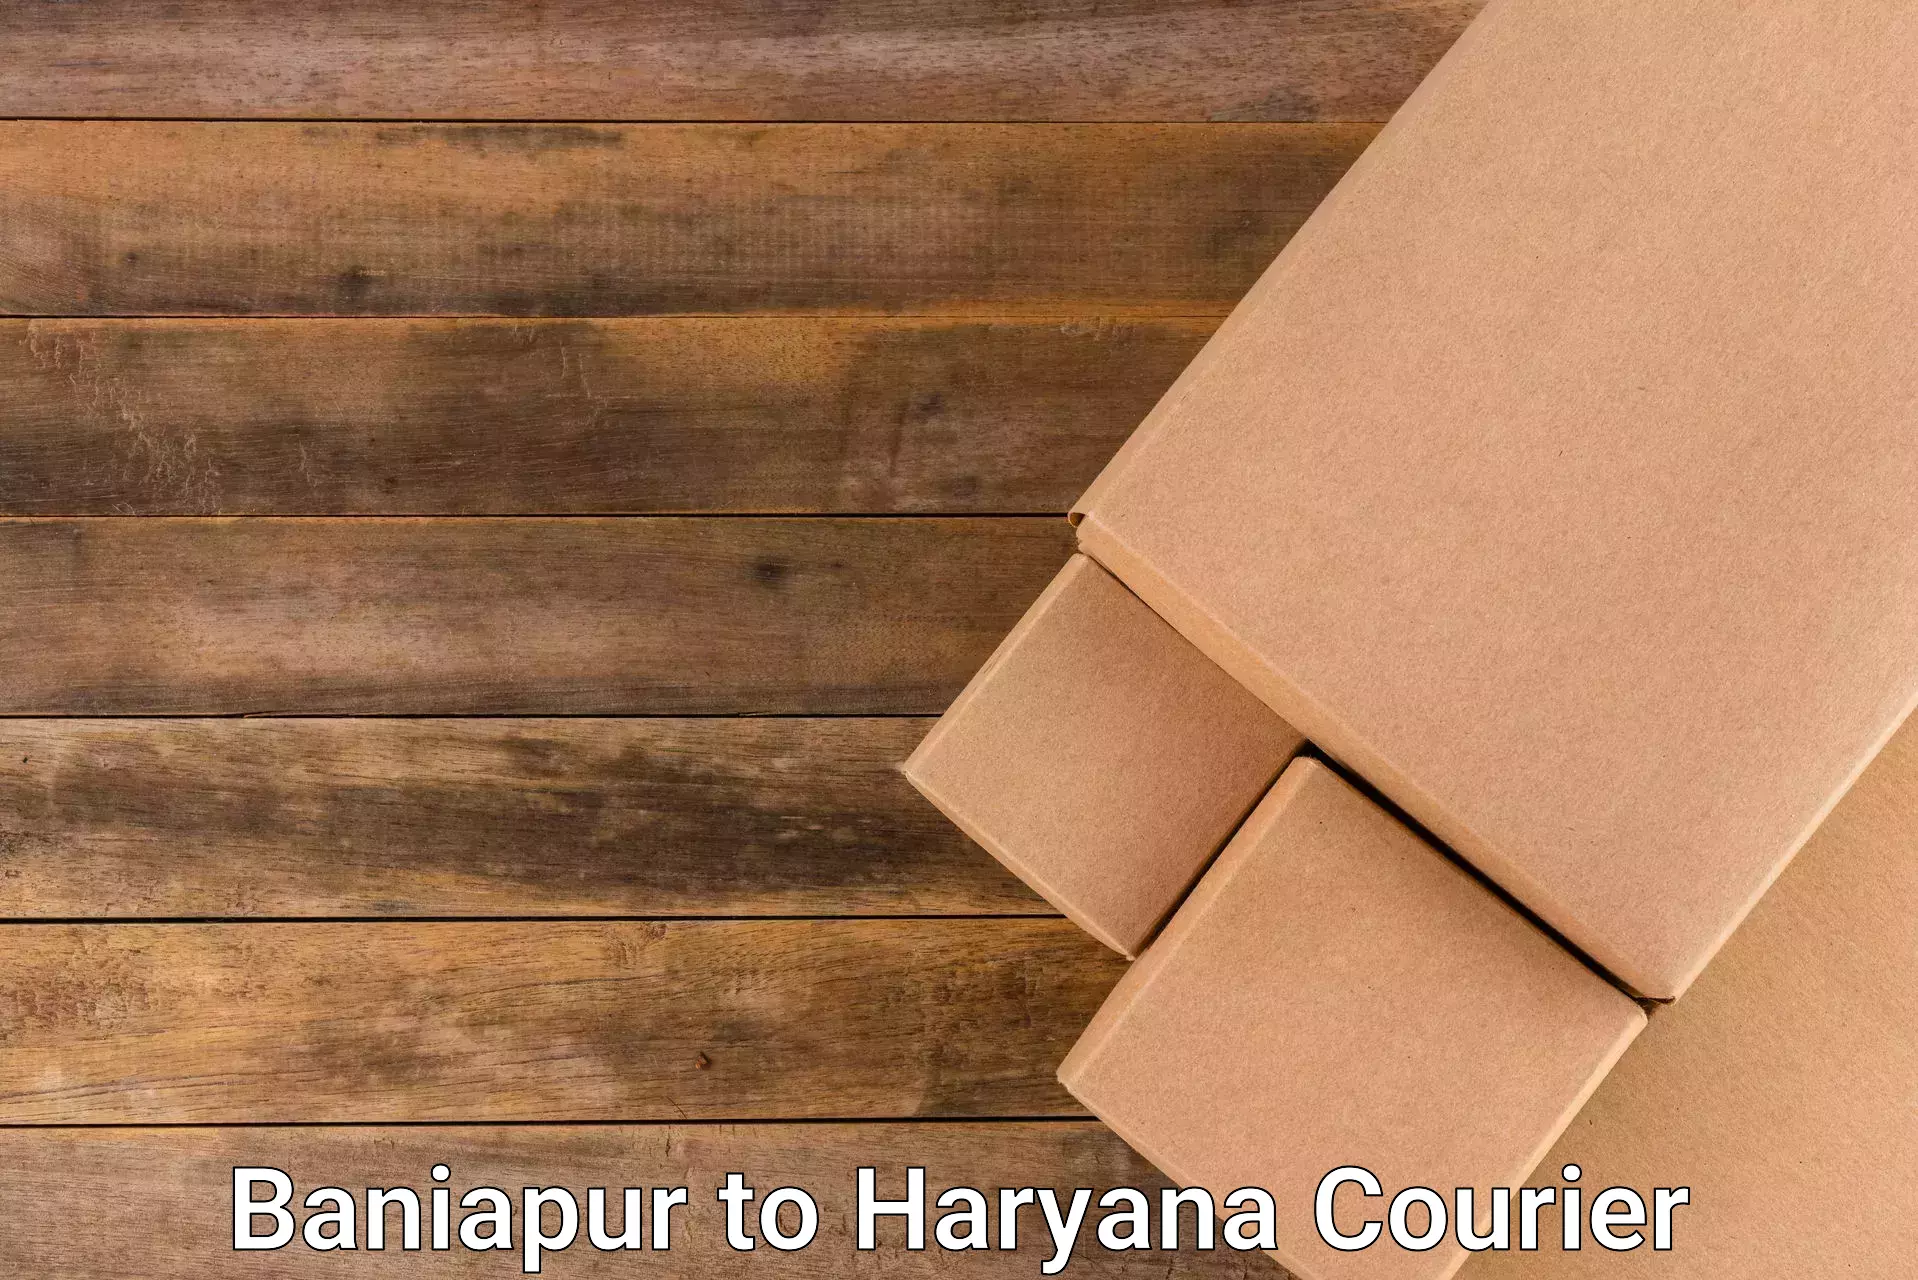 High-priority parcel service Baniapur to Palwal